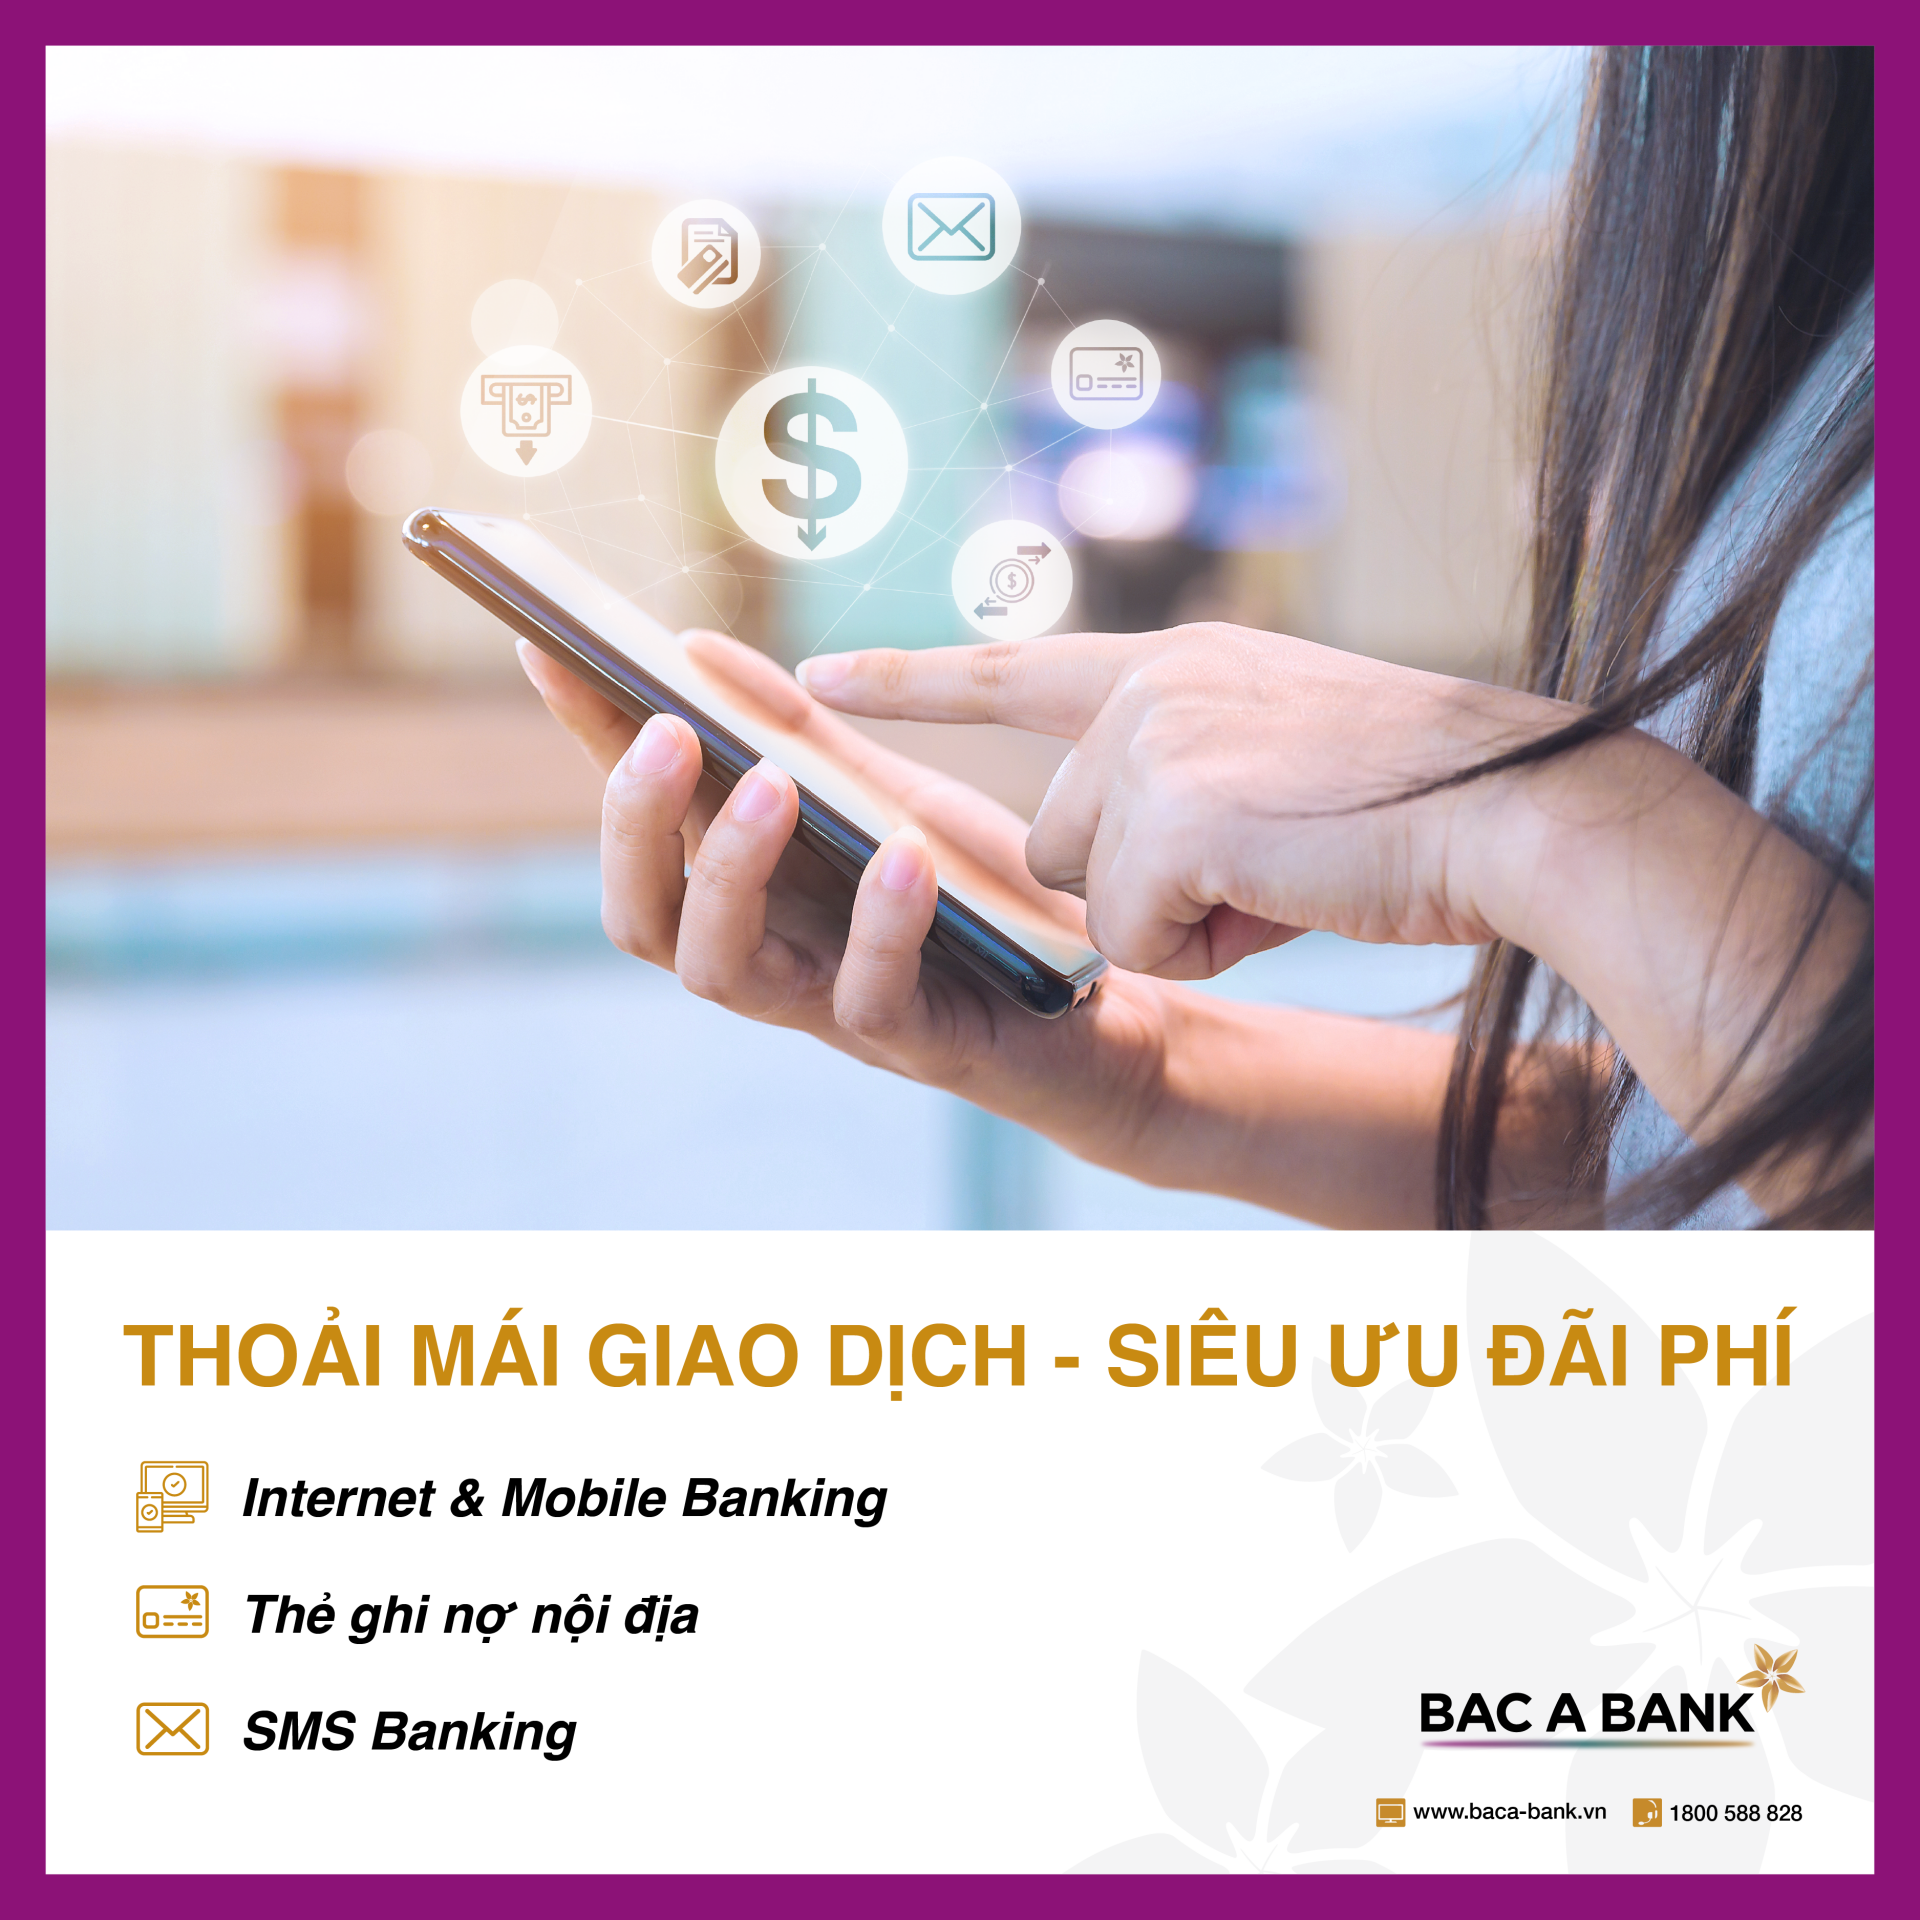 BAC A BANK removes fees for its debit card and e-banking services